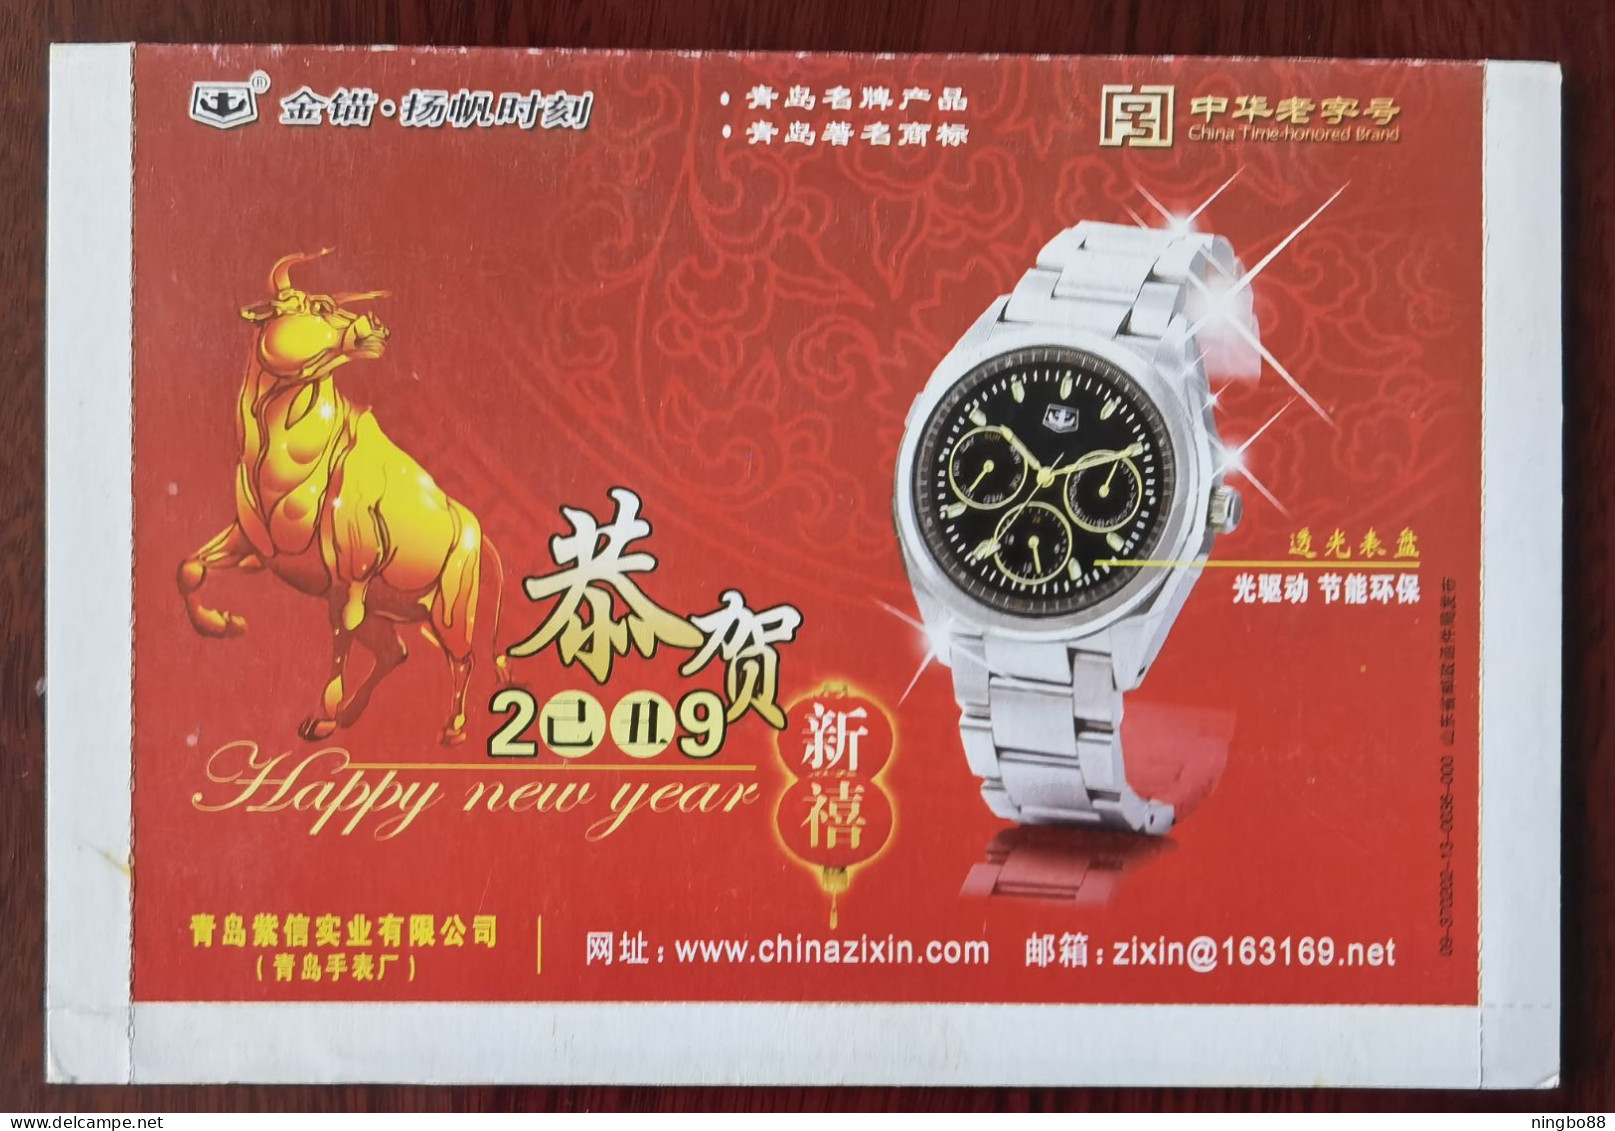 China Time-honored Brand Golden Anchor Photokinetic Energy Watch,China 2009 Qingdao Watch Factory Advertising PSL - Horlogerie